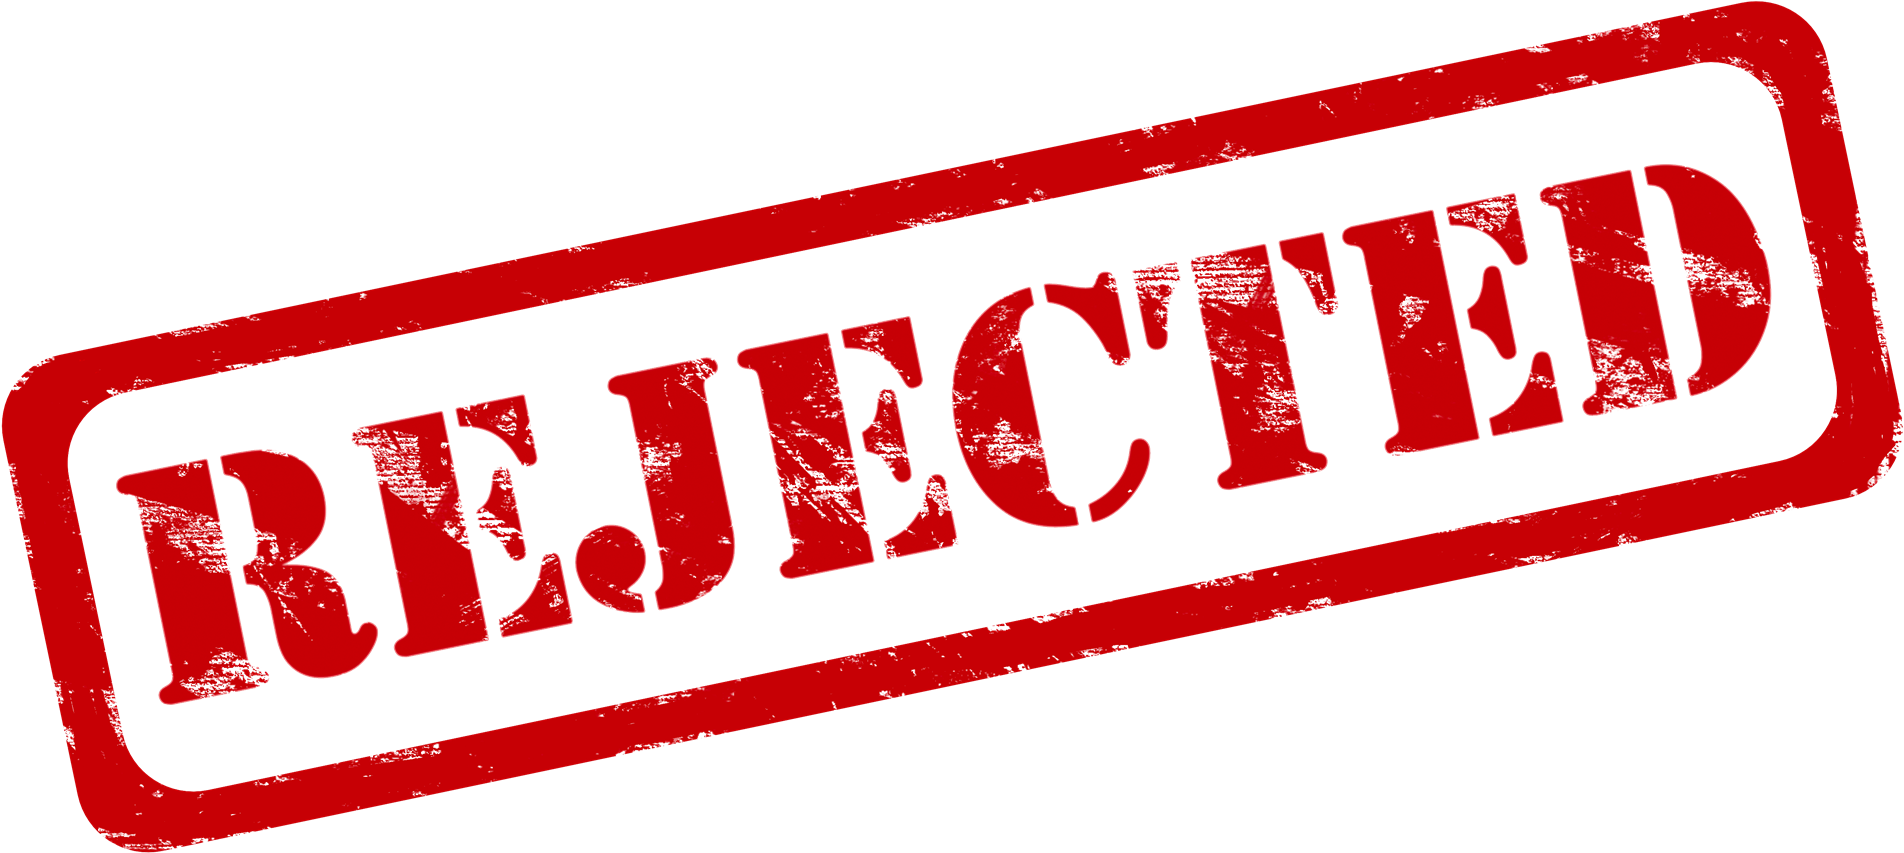 Rejected Stamp Graphic PNG image